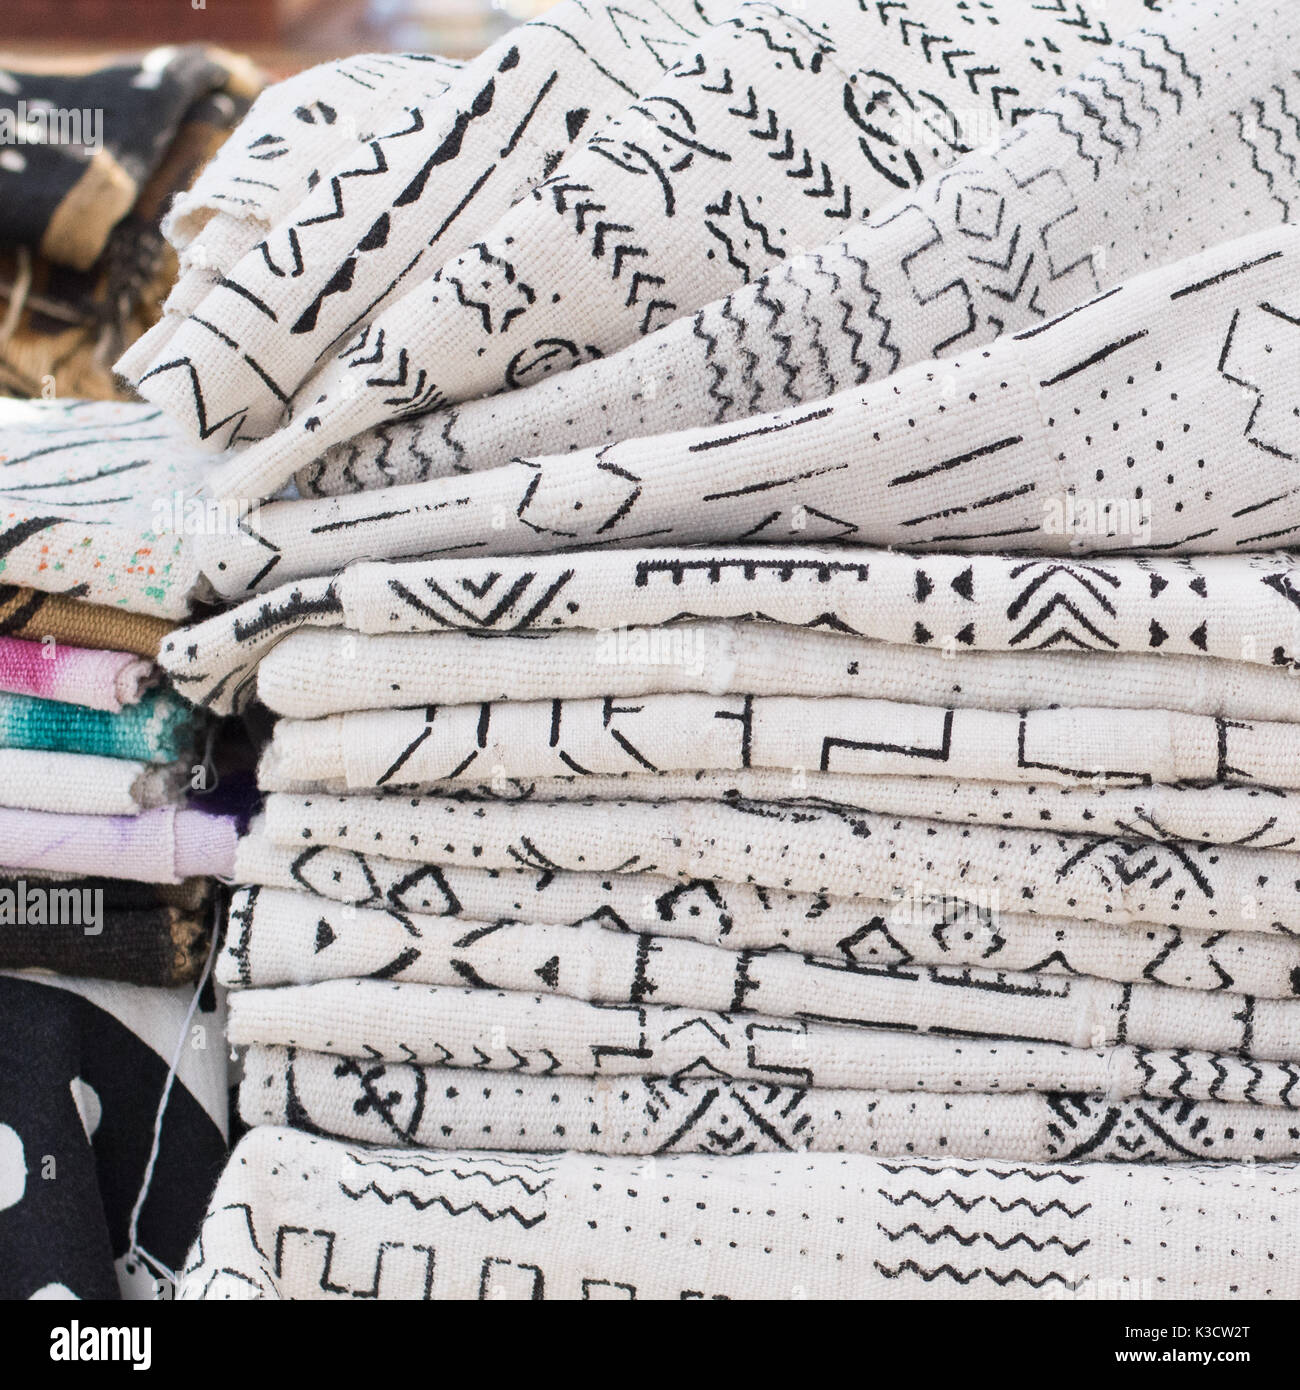 African textiles at a market stall featuring black and white patterns on hand-woven cloth by a woman from Ghana Stock Photo